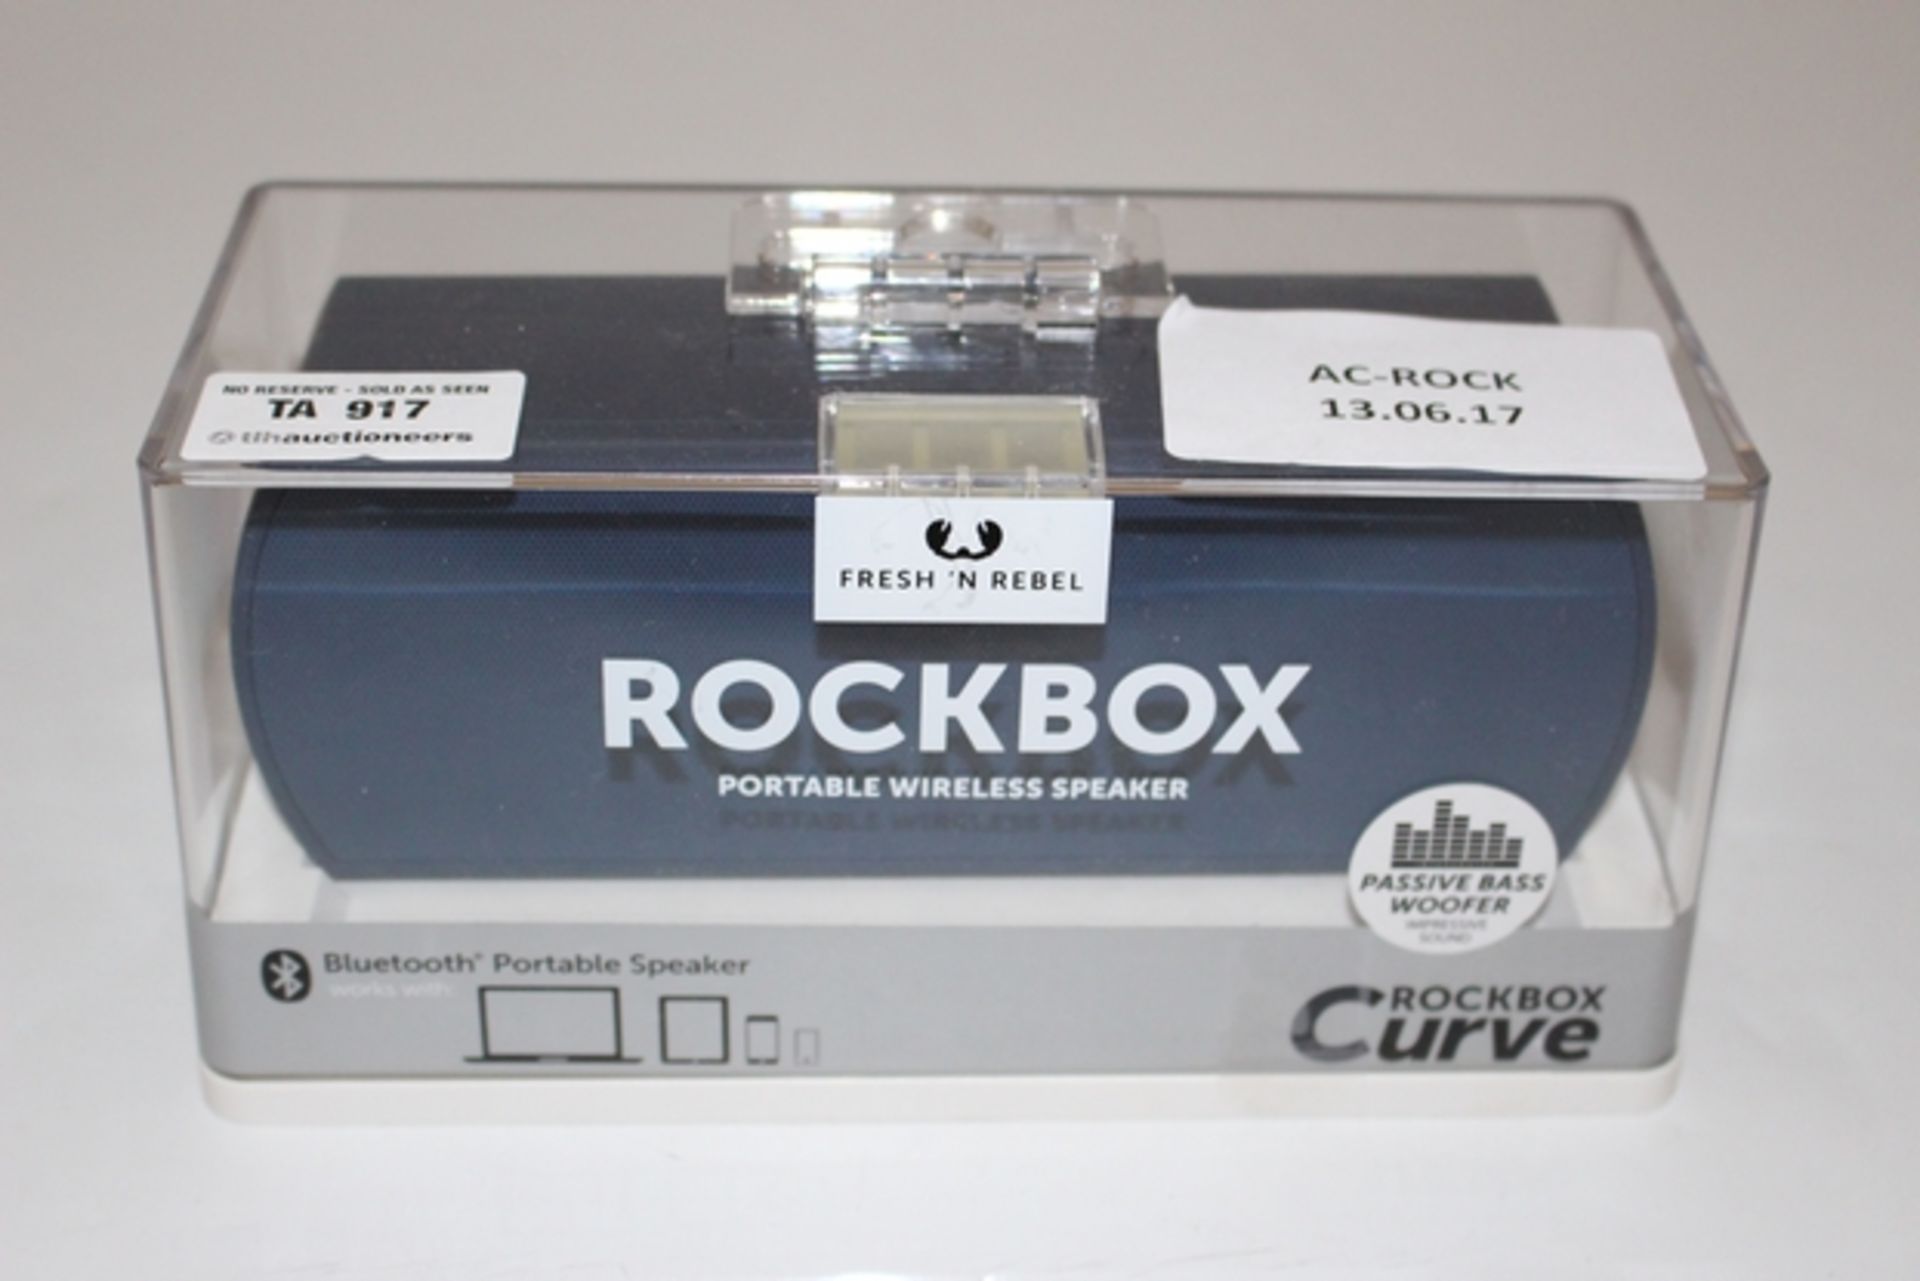 1 x BOXED ROCK BOX PORTABLE WIRELESS SPEAKER *PLEASE NOTE THAT THE BID PRICE IS MULTIPLIED BY THE